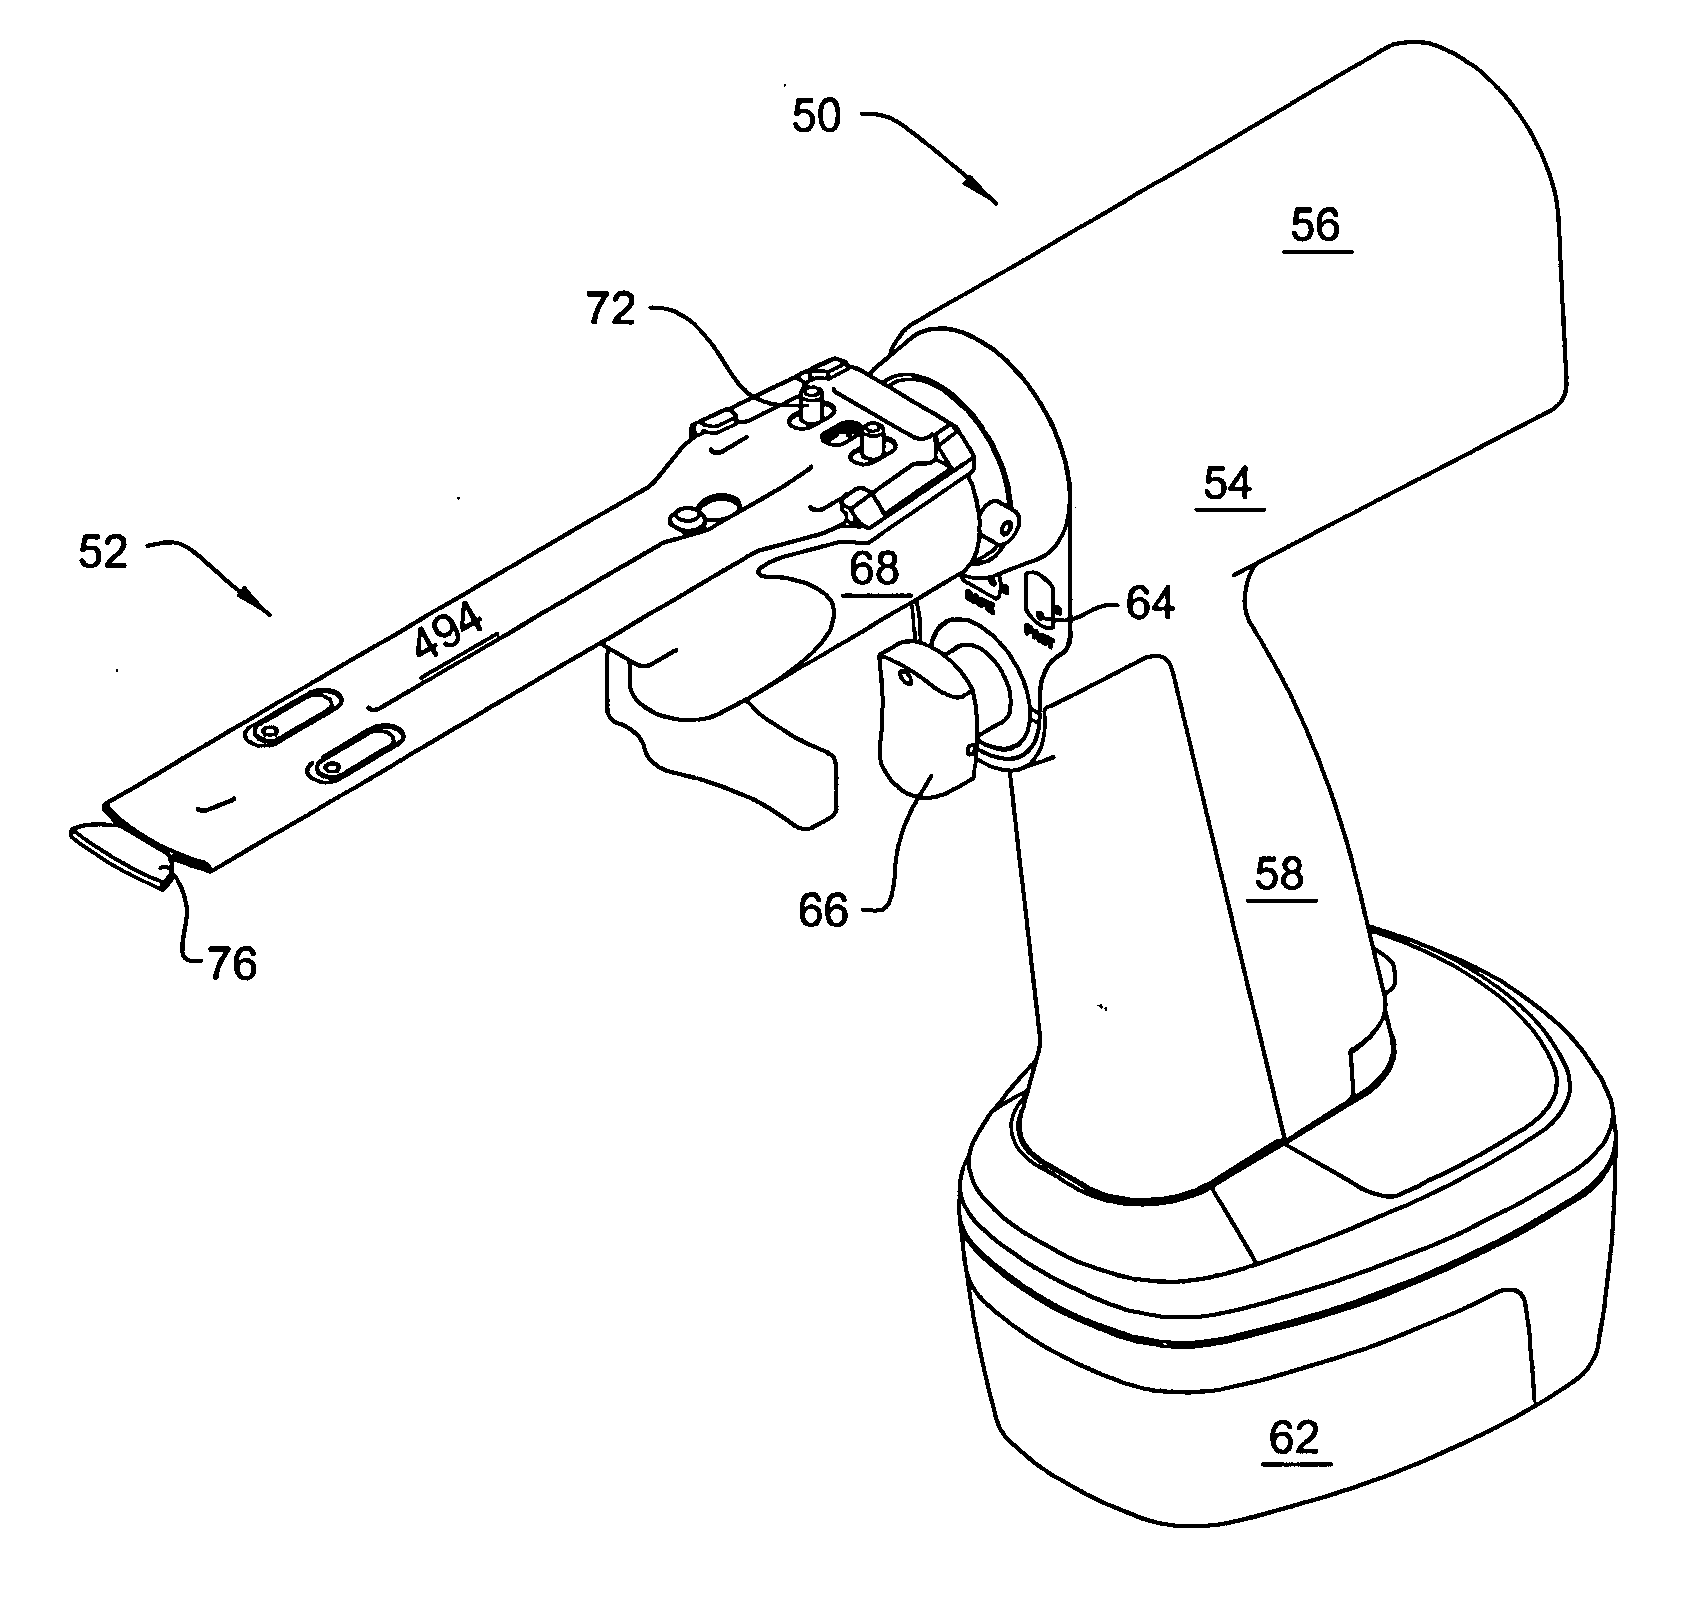 Surgical sagittal saw with indexing head and toolless blade coupling assembly for actuating an oscillating tip saw blade and oscillating tip saw blade with self cleaning head